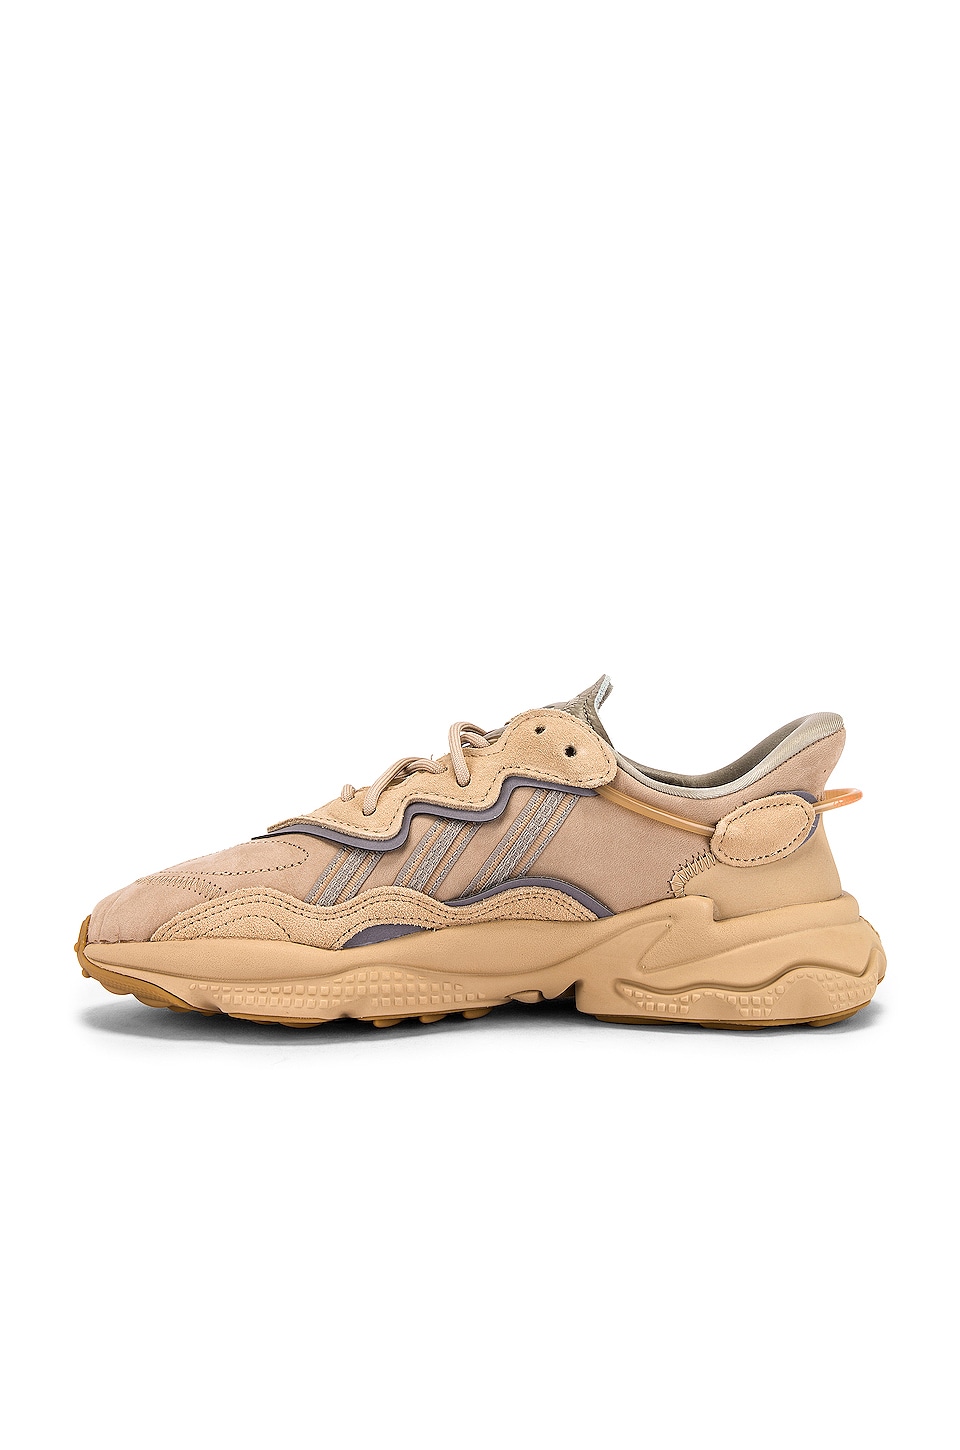 Adidas Originals Ozweego In St Pale Nude And Light Brown And Solar Red